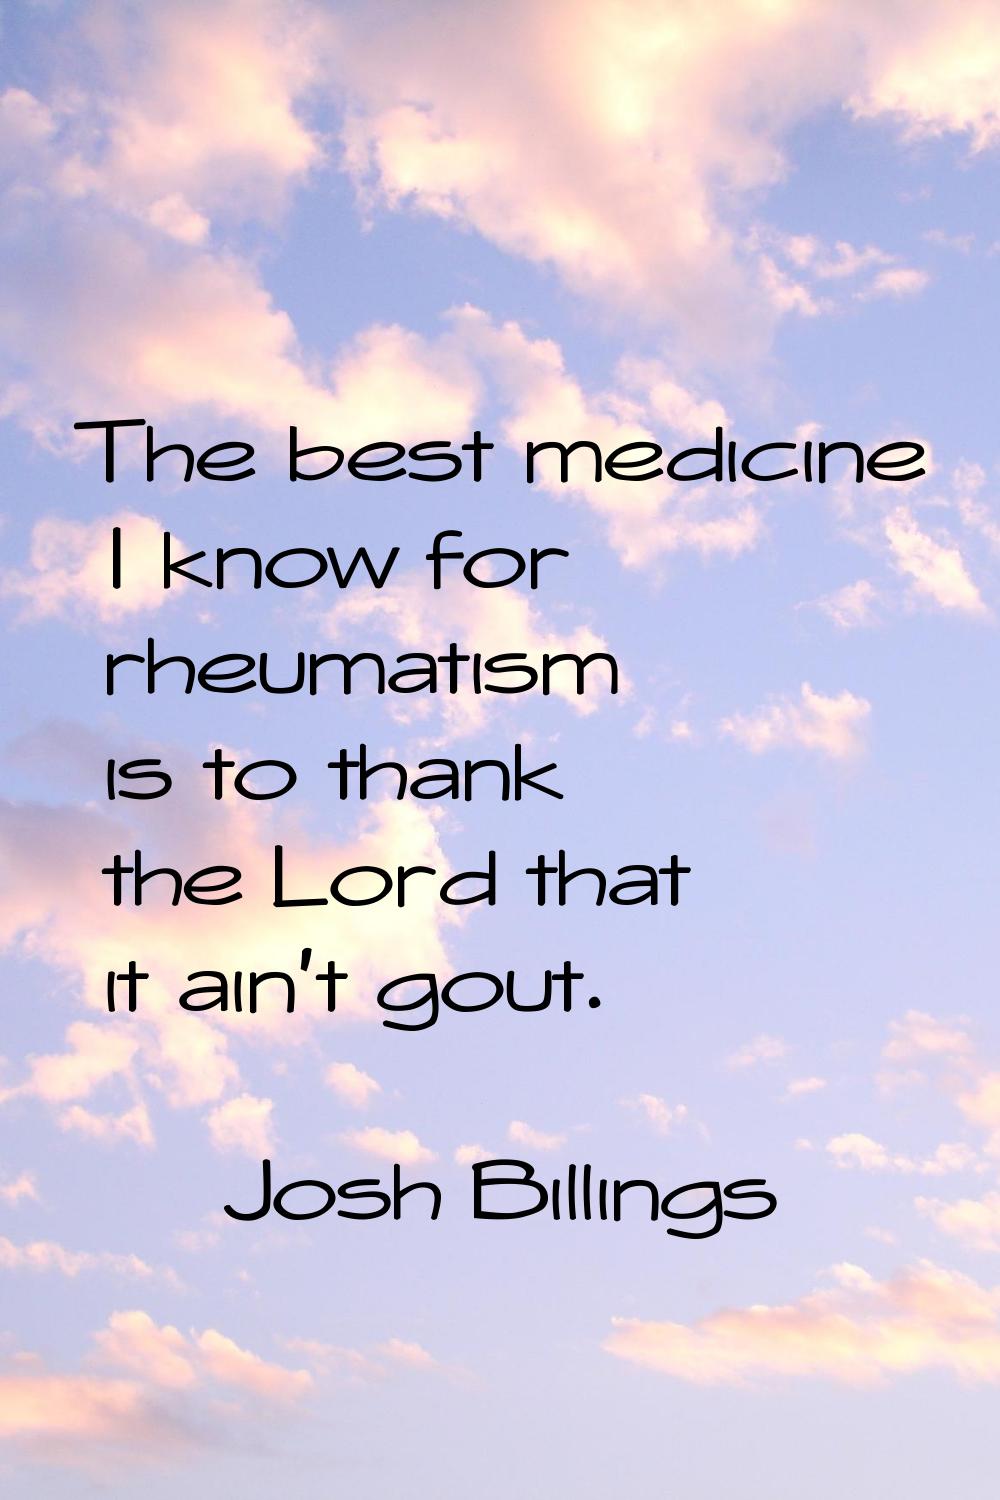 The best medicine I know for rheumatism is to thank the Lord that it ain't gout.